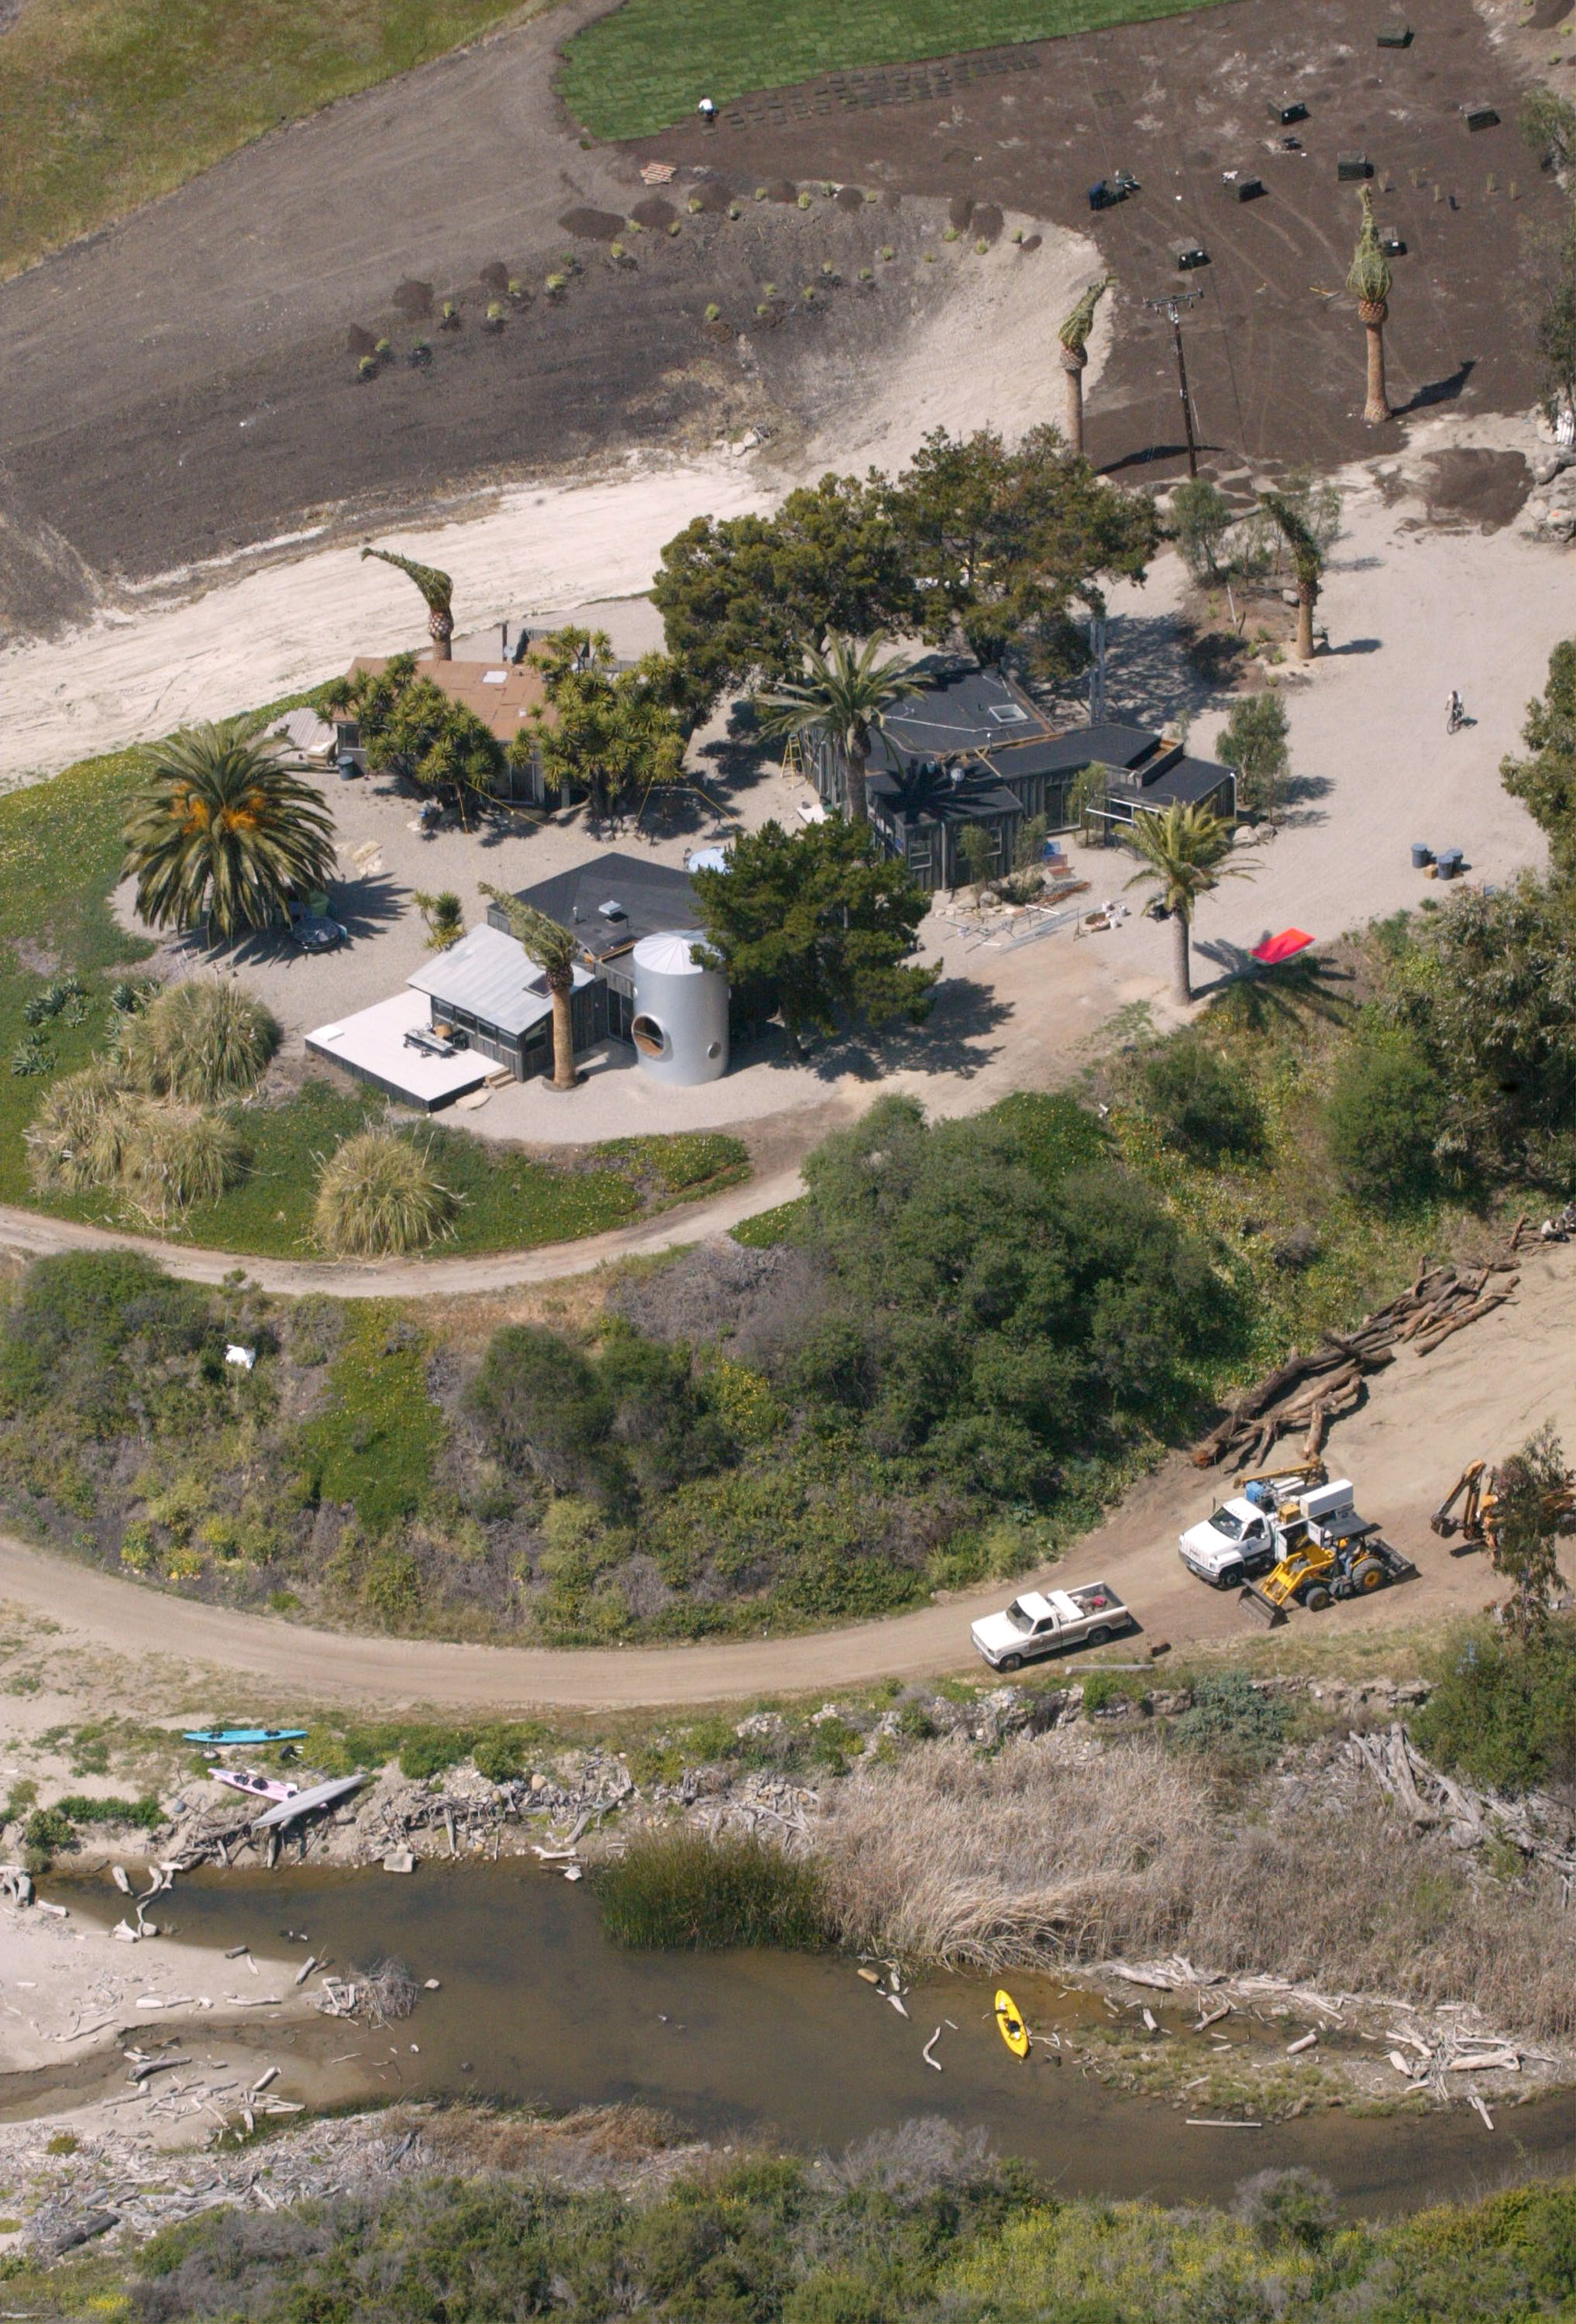 Brad Pitt's home as seen on March 27, 2002 in Santa Barbara, California. | Source: Getty Images